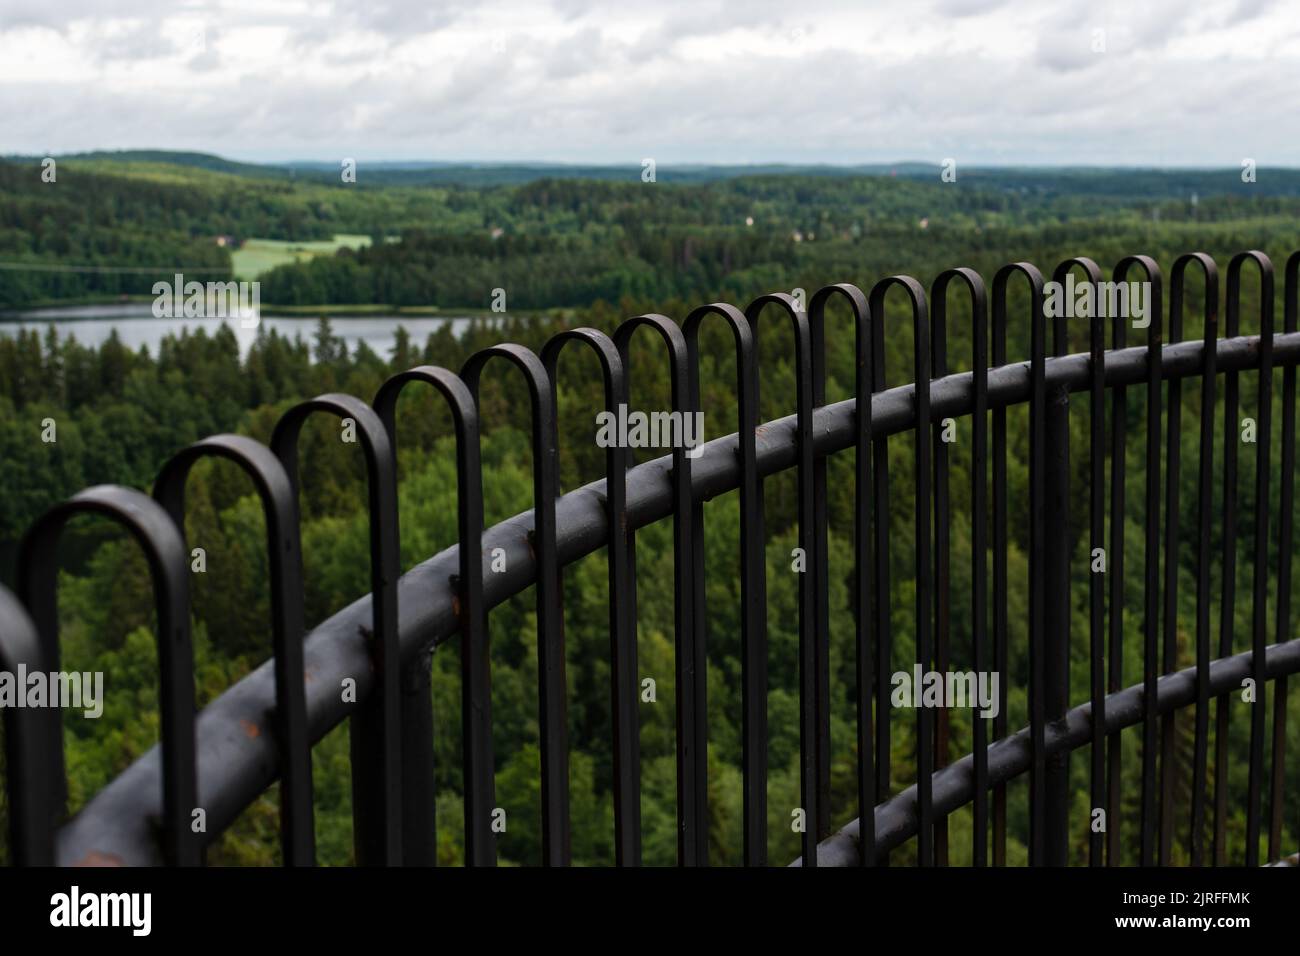 Black metal railing with out of focus nature landscape in the background, Aulanko, Finland Stock Photo